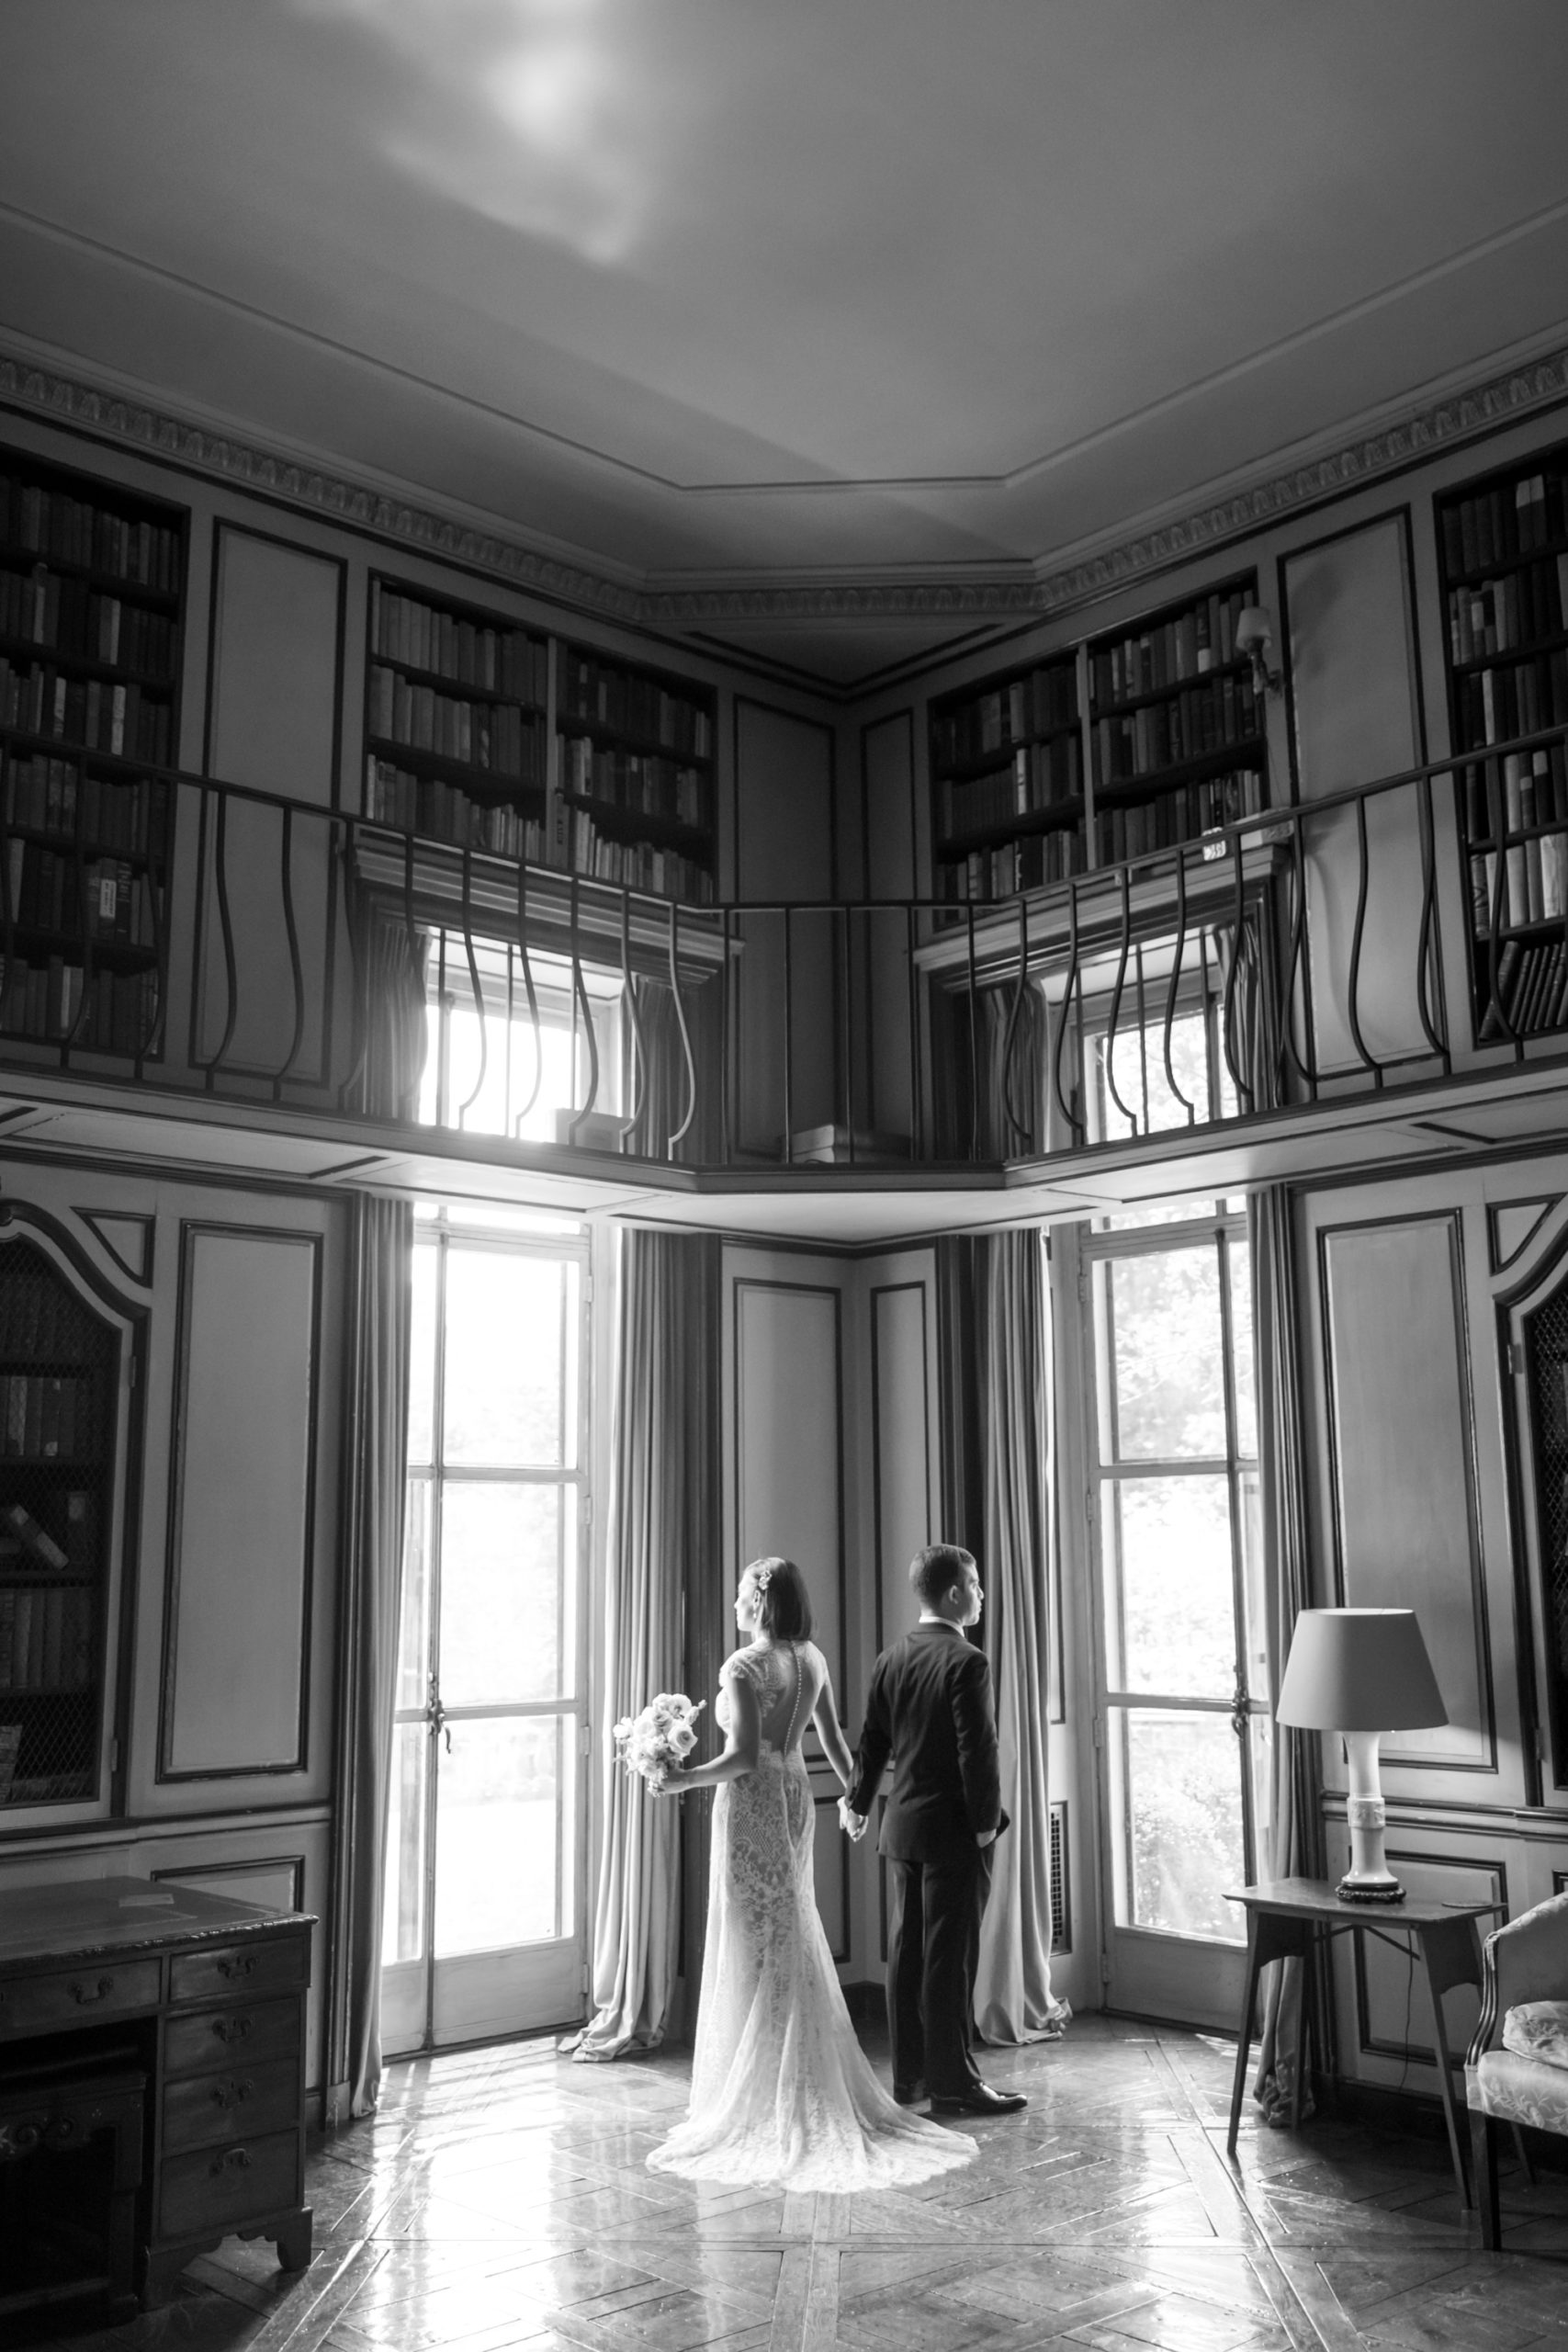 the couple posed in the Peterloon Estate library